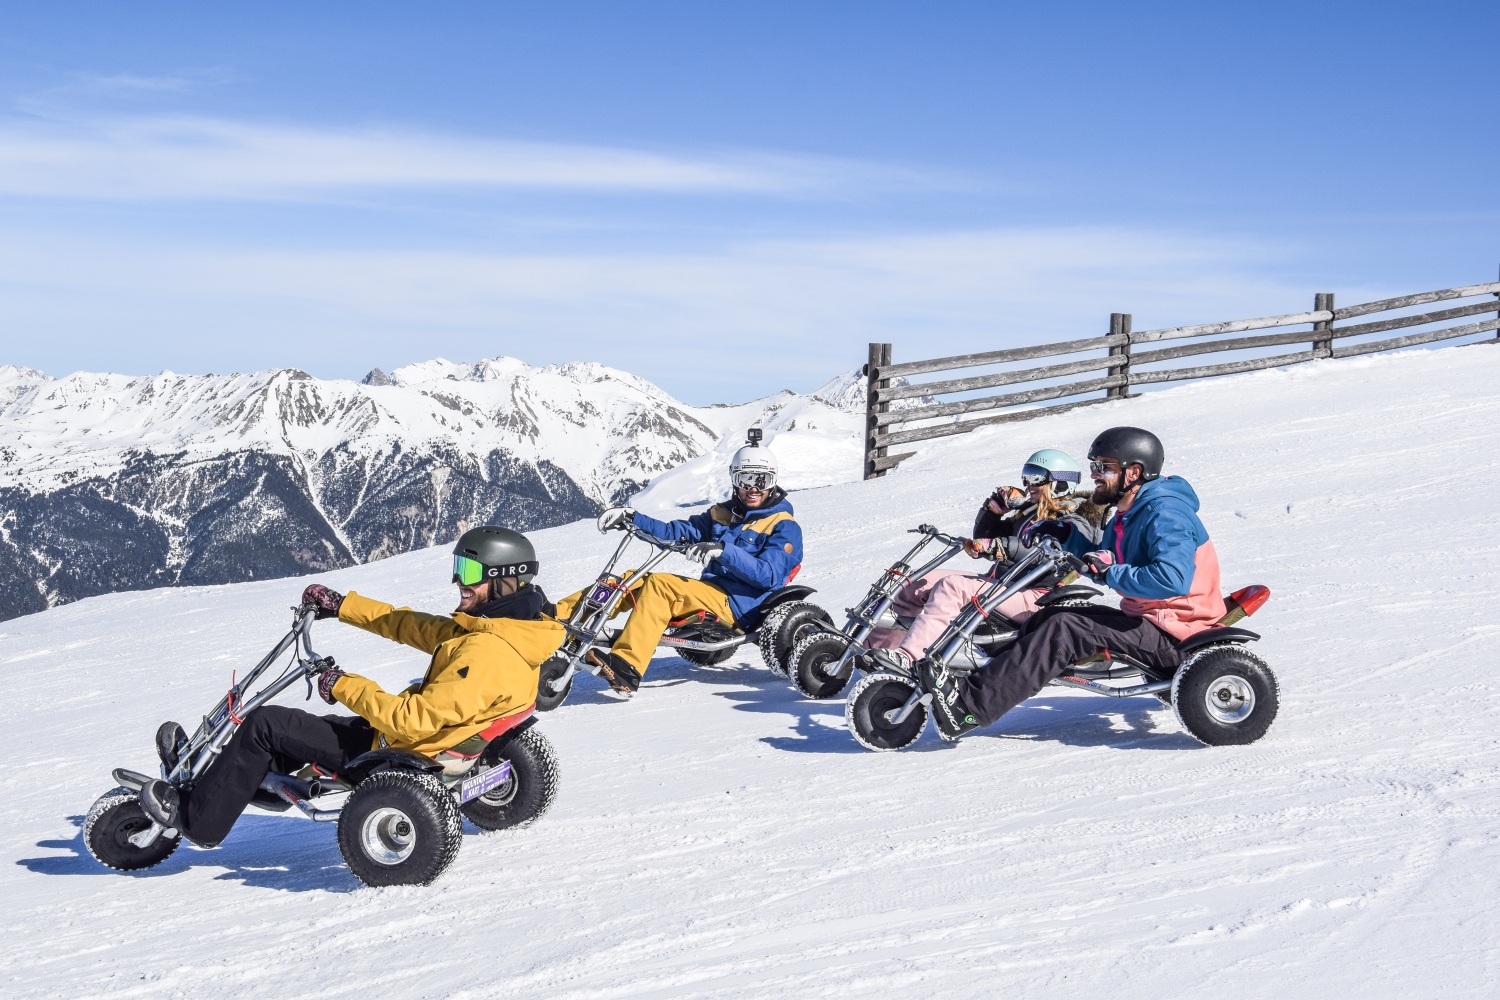 Group riding down slope on snow tricyles - Serre Chavelier, France